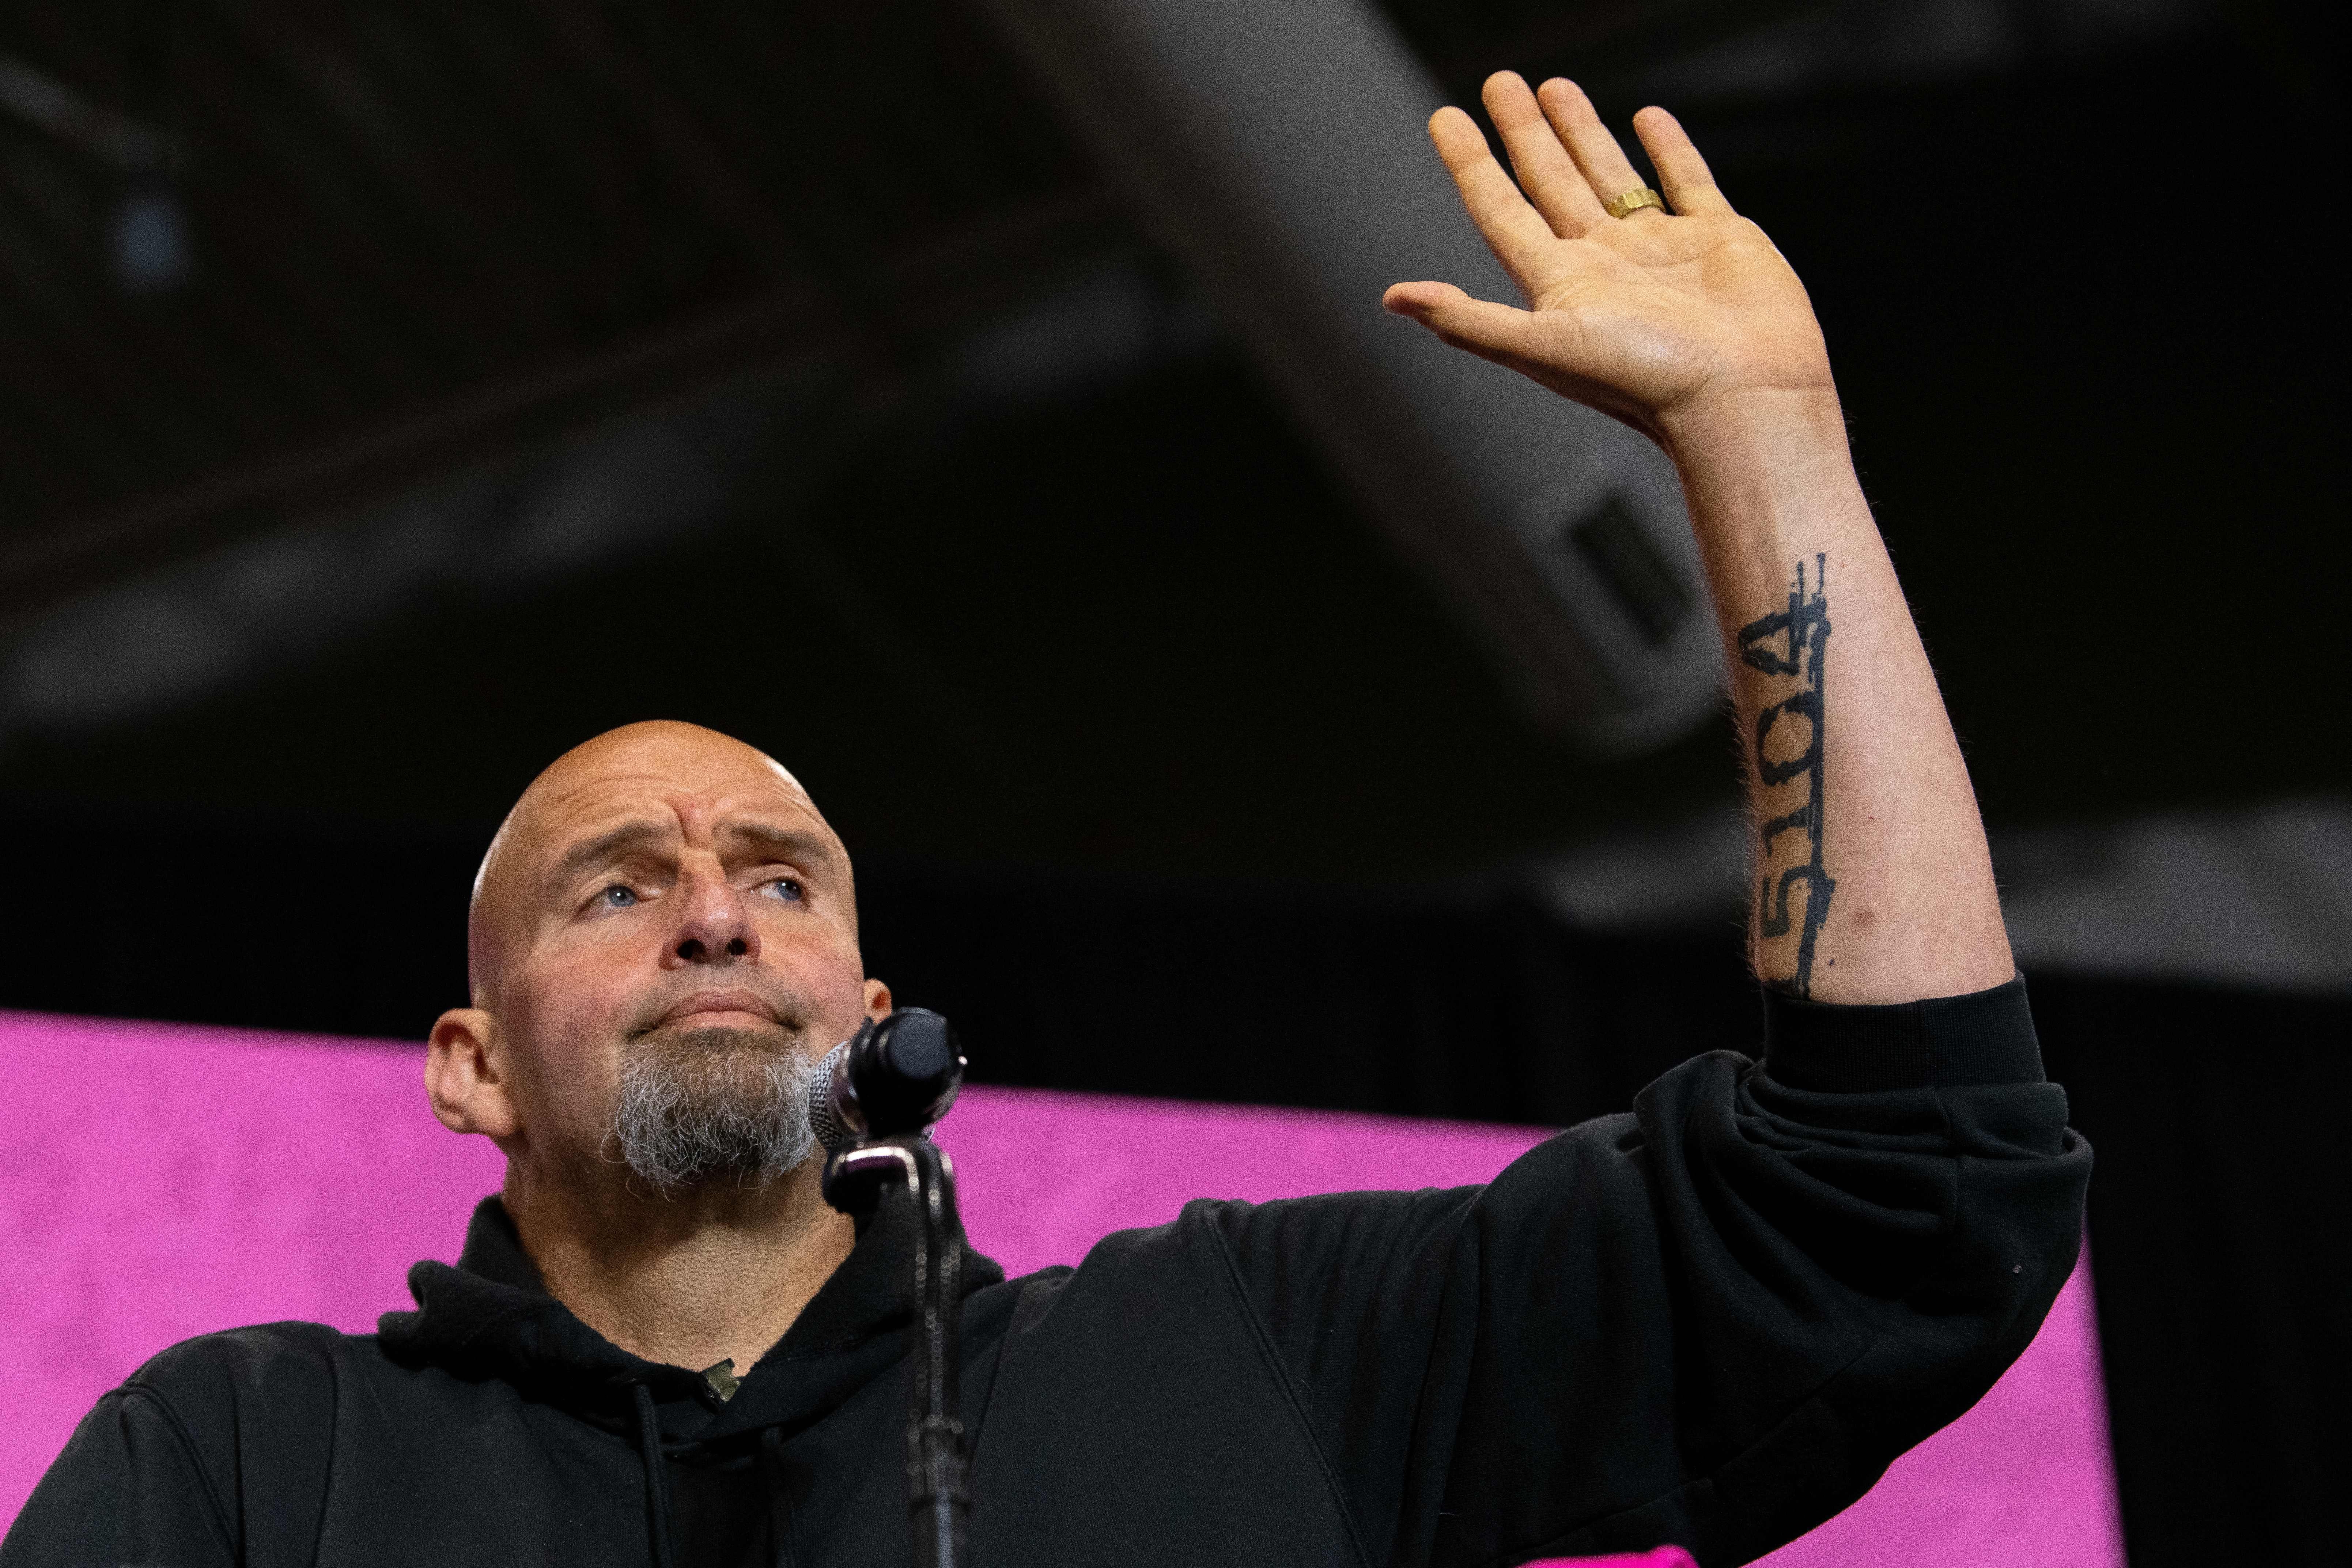 John Fetterman stands in front of a mic and waves.